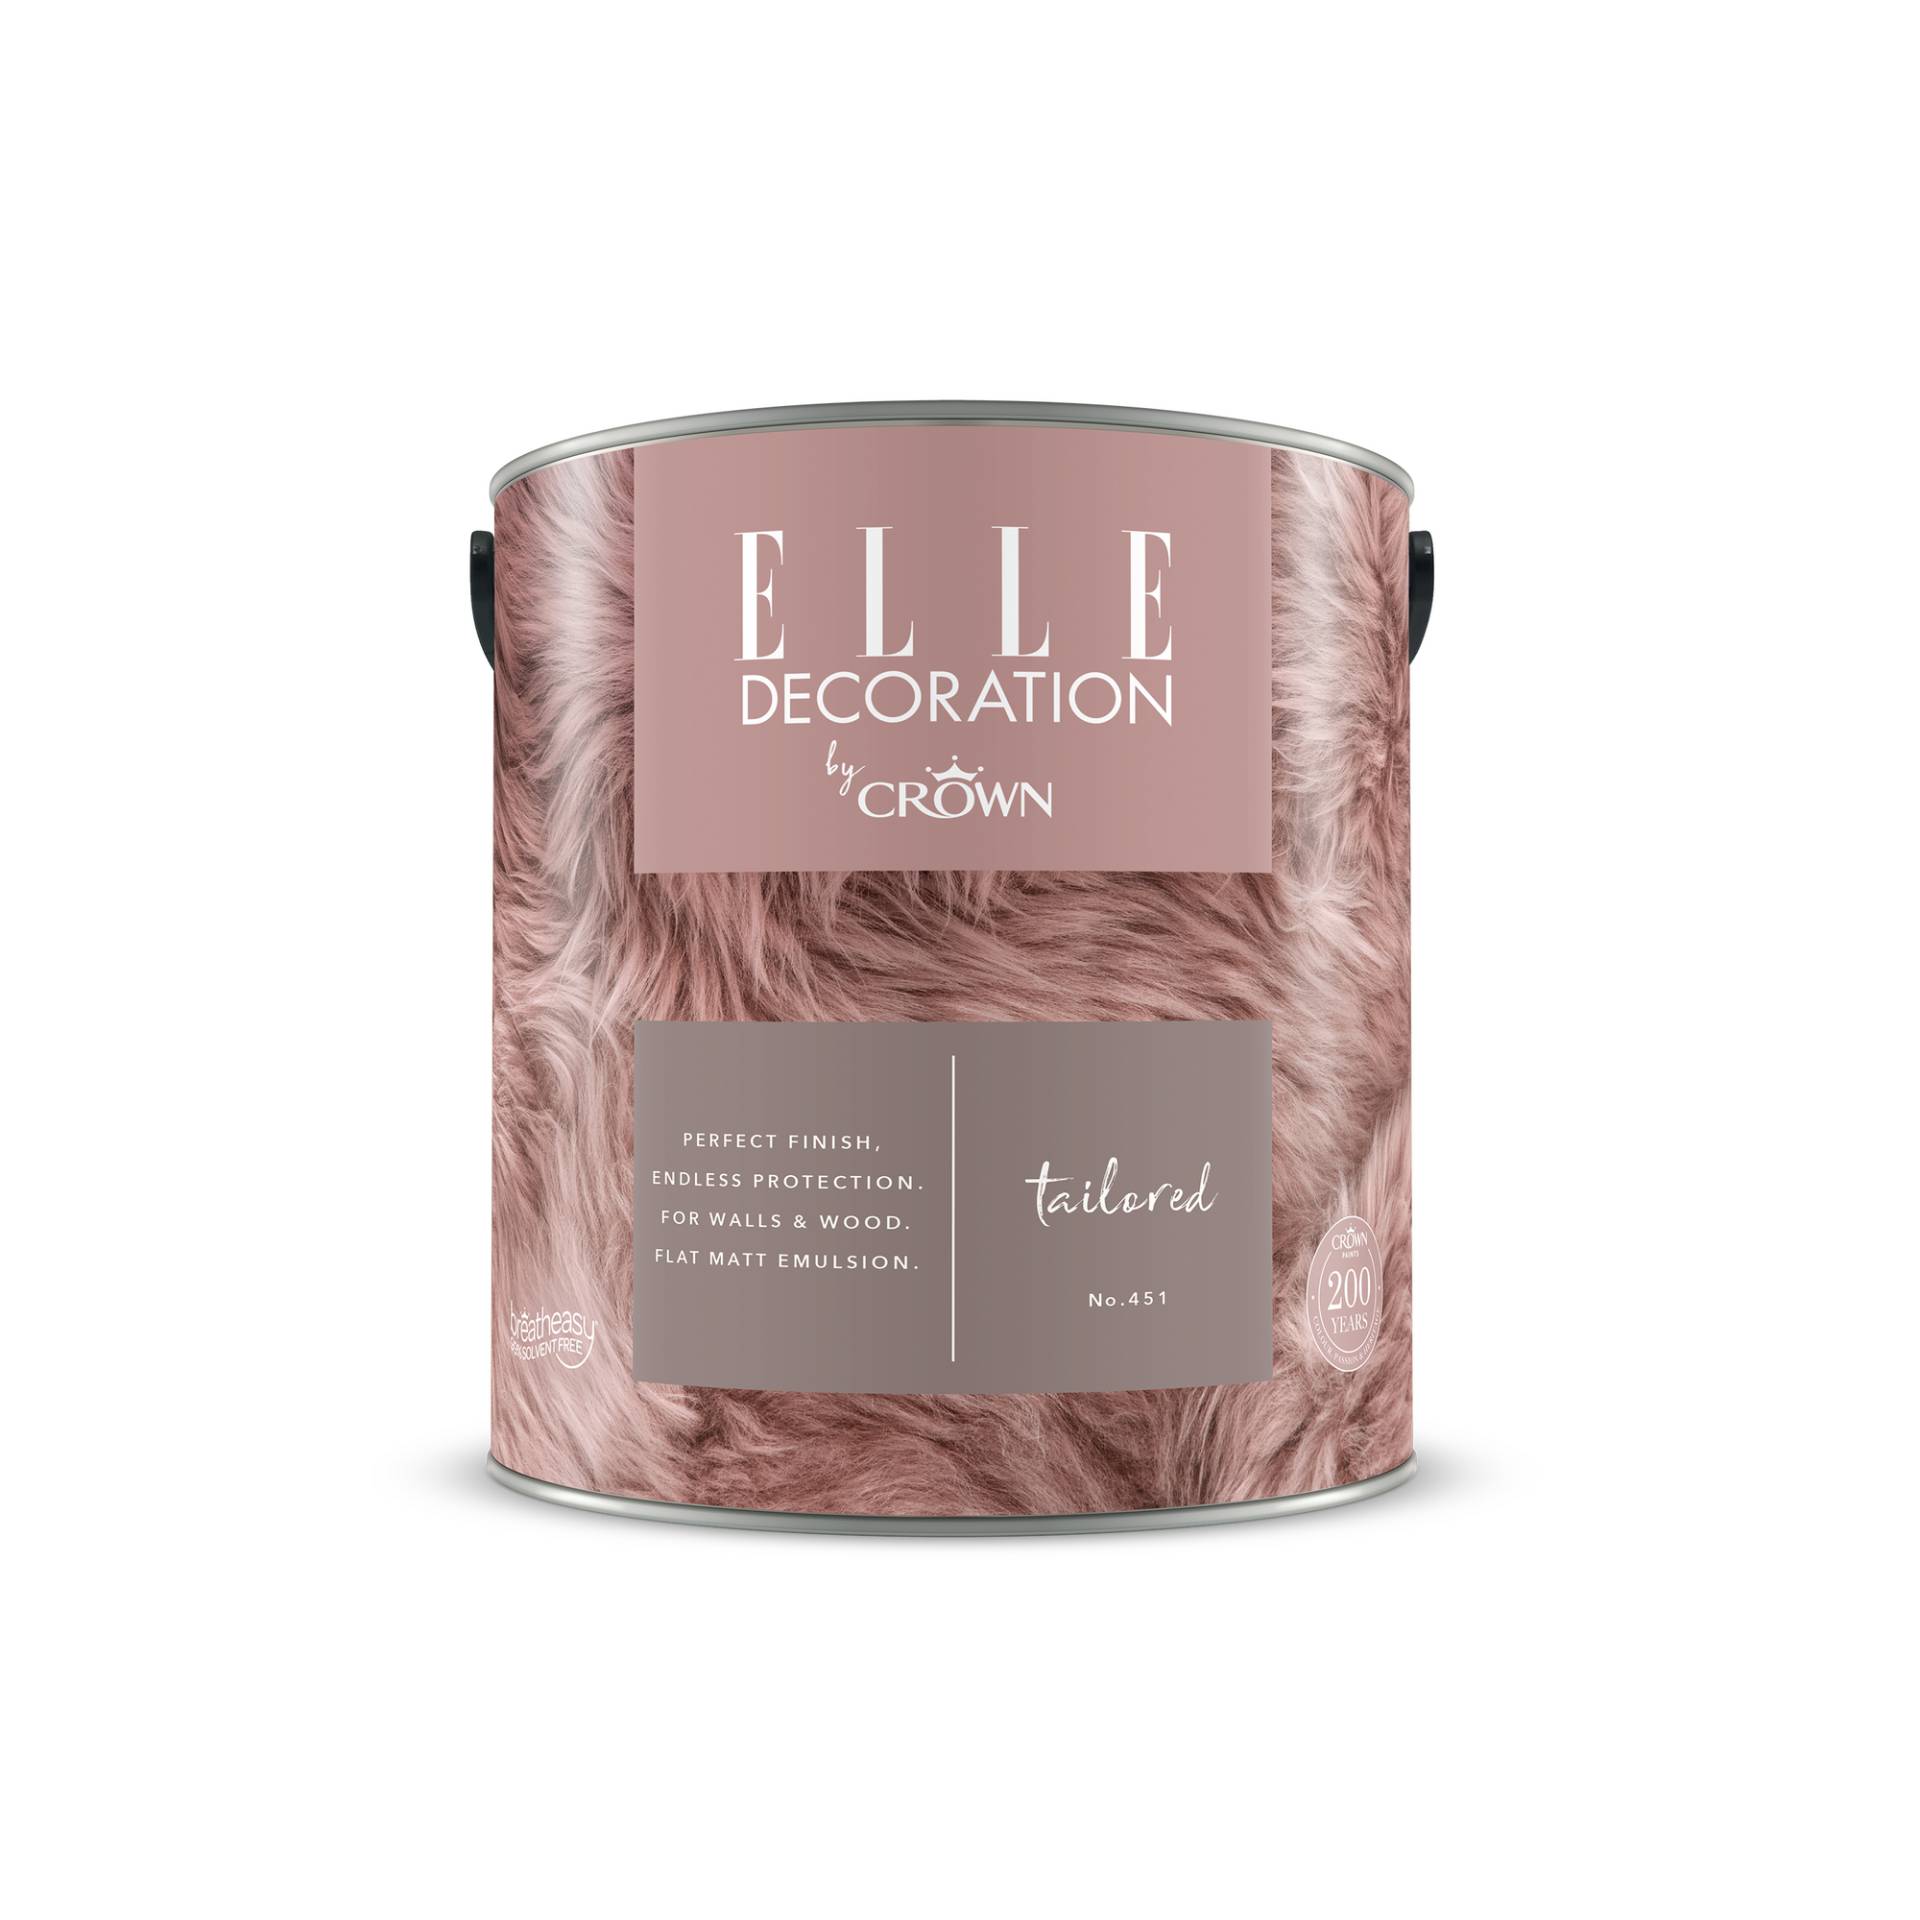 ELLE Decoration by Crown Wandfarbe 'Tailored No. 451' greige matt 2,5 l von ELLE Decoration by Crown